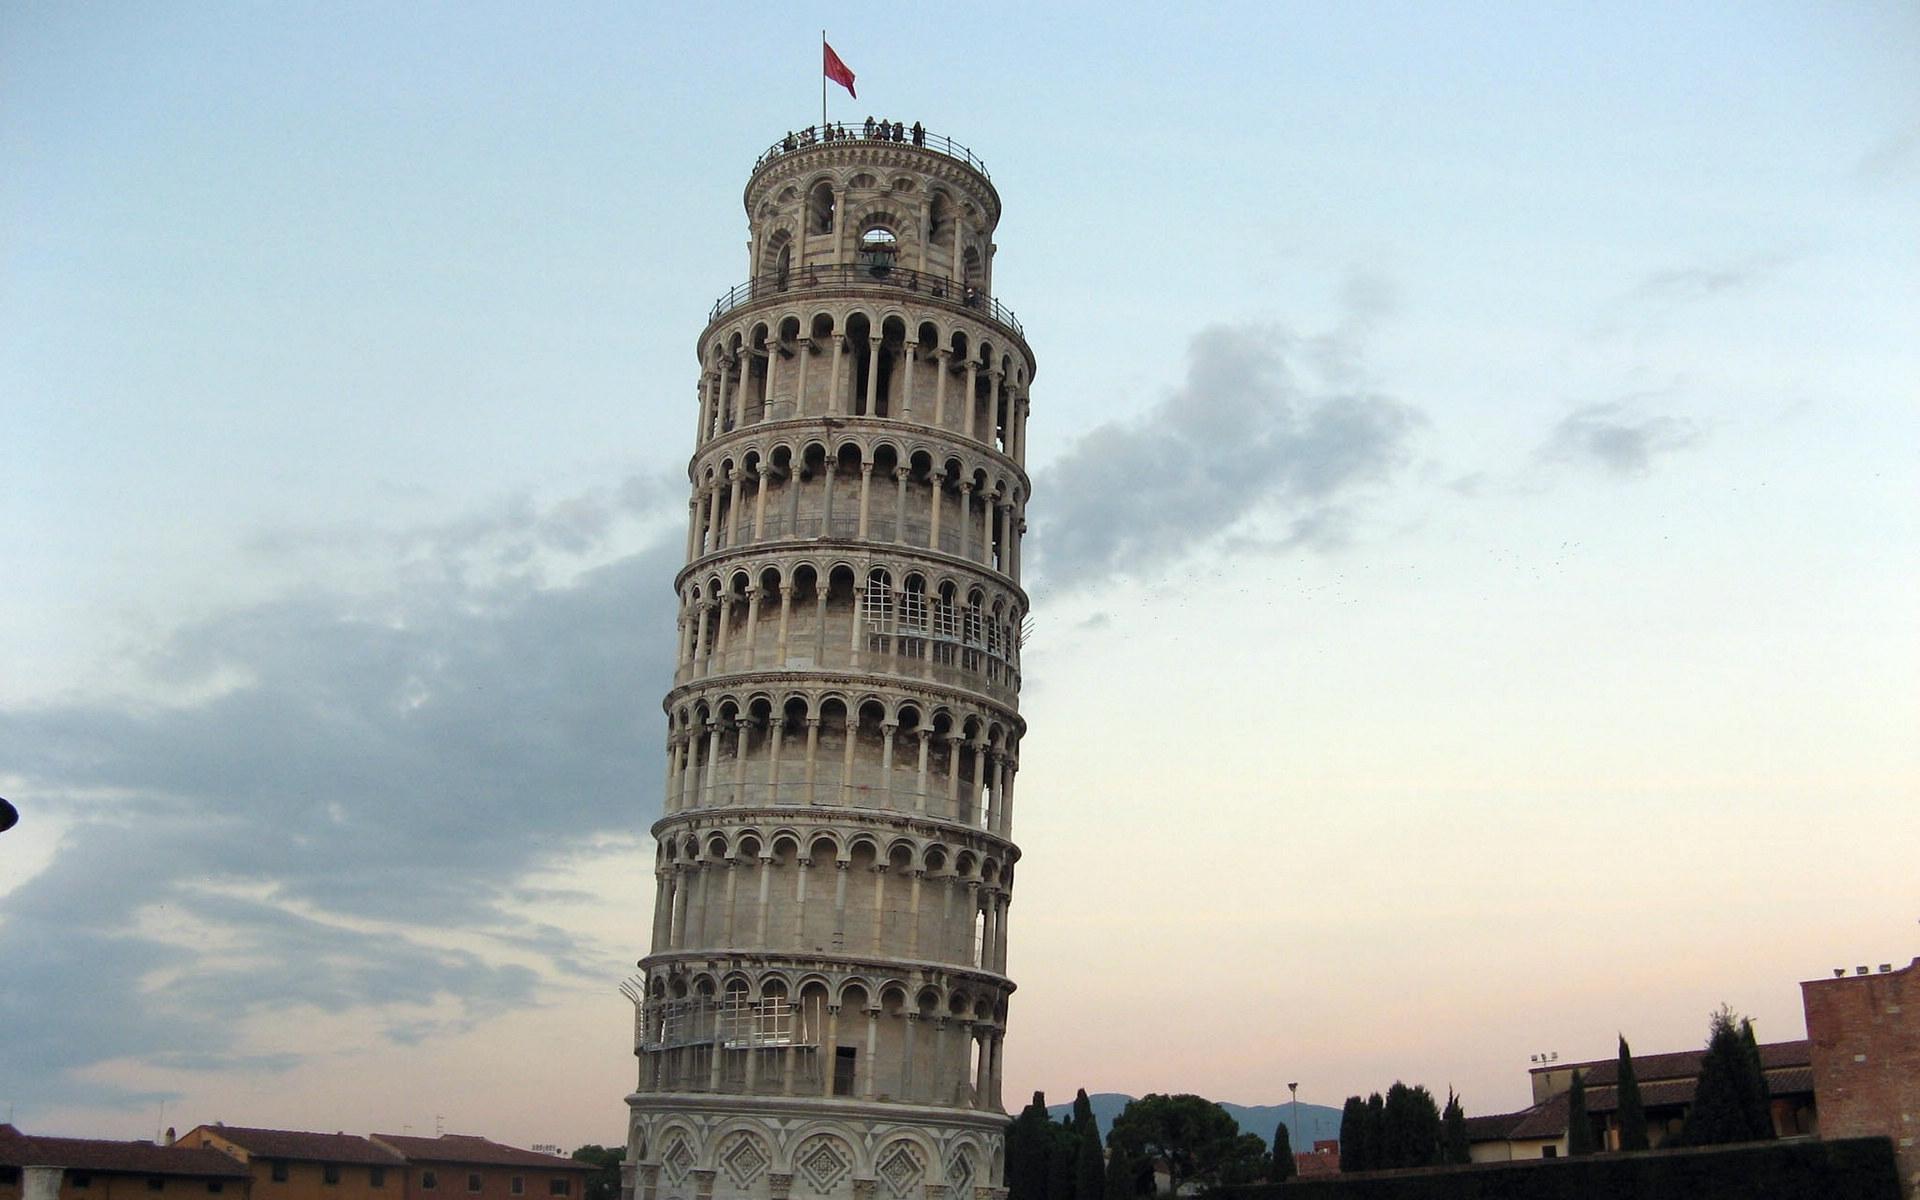 Leaning Tower of Pisa Italy Theme for Windows 8. Download free